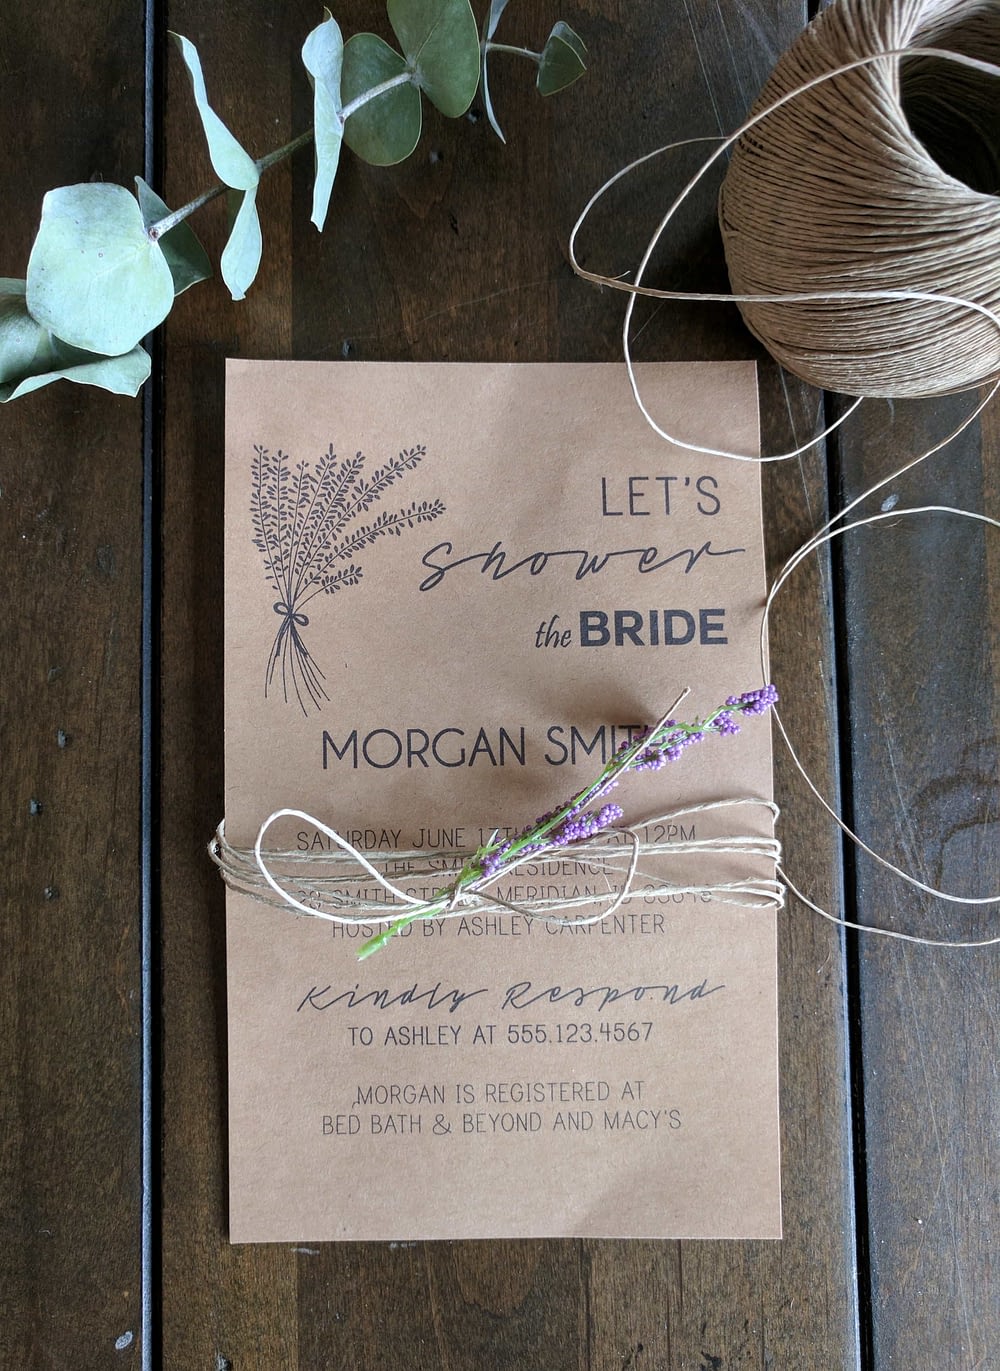 A DIY wedding Invitation sitting on a wood table wrapped in twine with lavender 